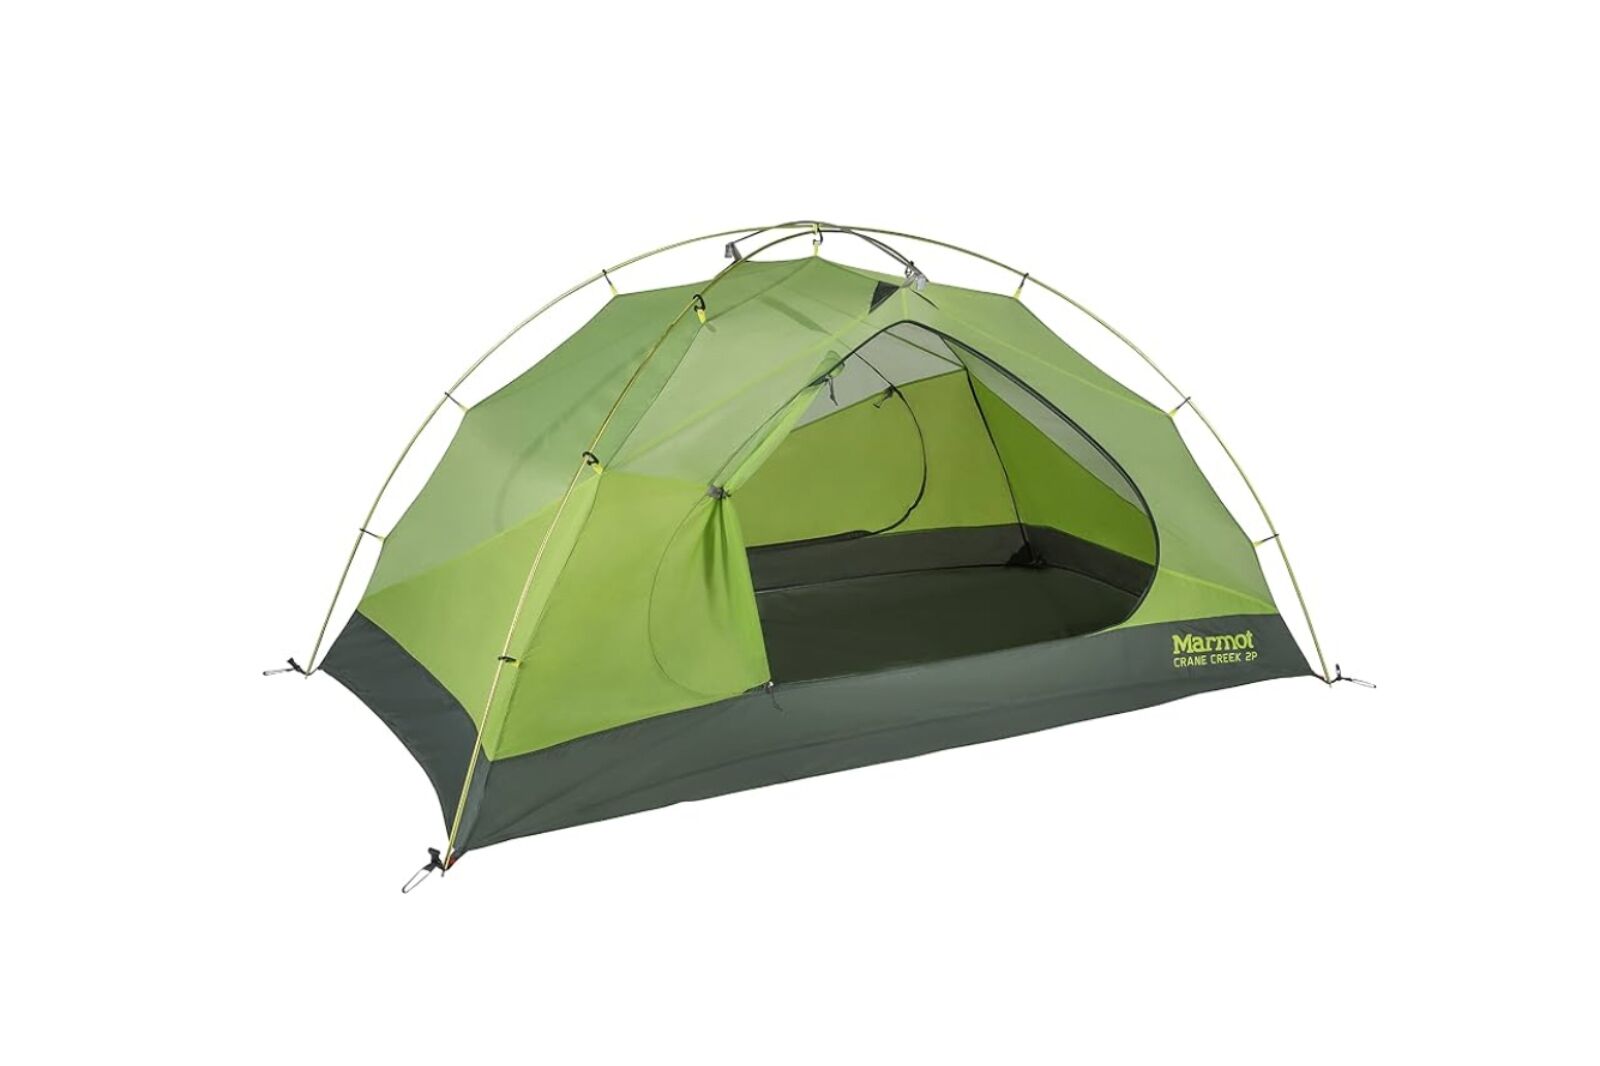 Marmot Crane Creek Two-person backpacking tent